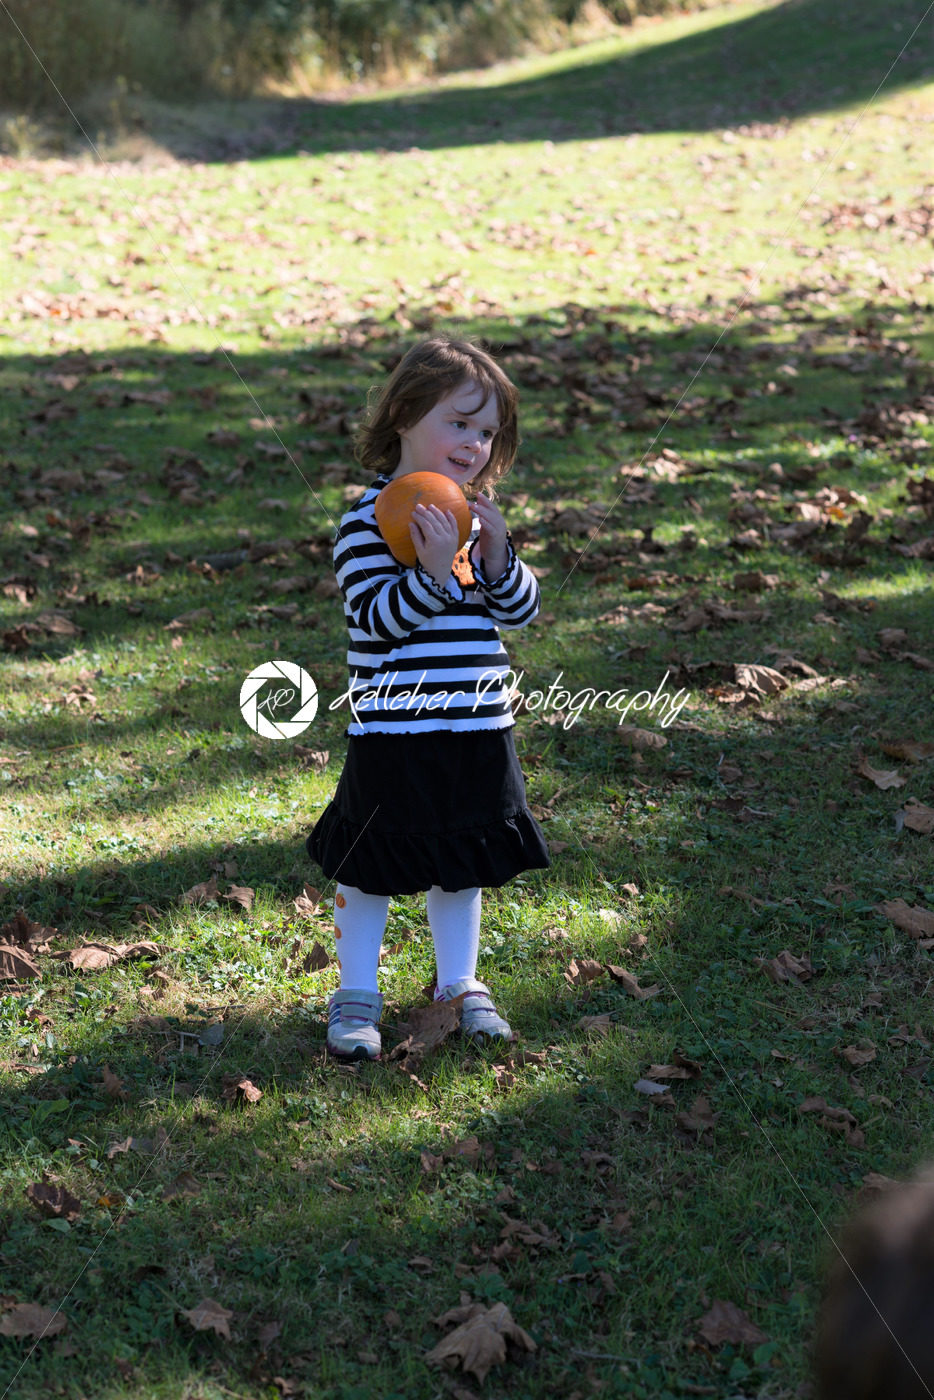 Beautiful smiling toddler girl wearing black and white Halloween outfit outdoors holding little pumpkin and smiling with grass and falling leaves in background - Kelleher Photography Store